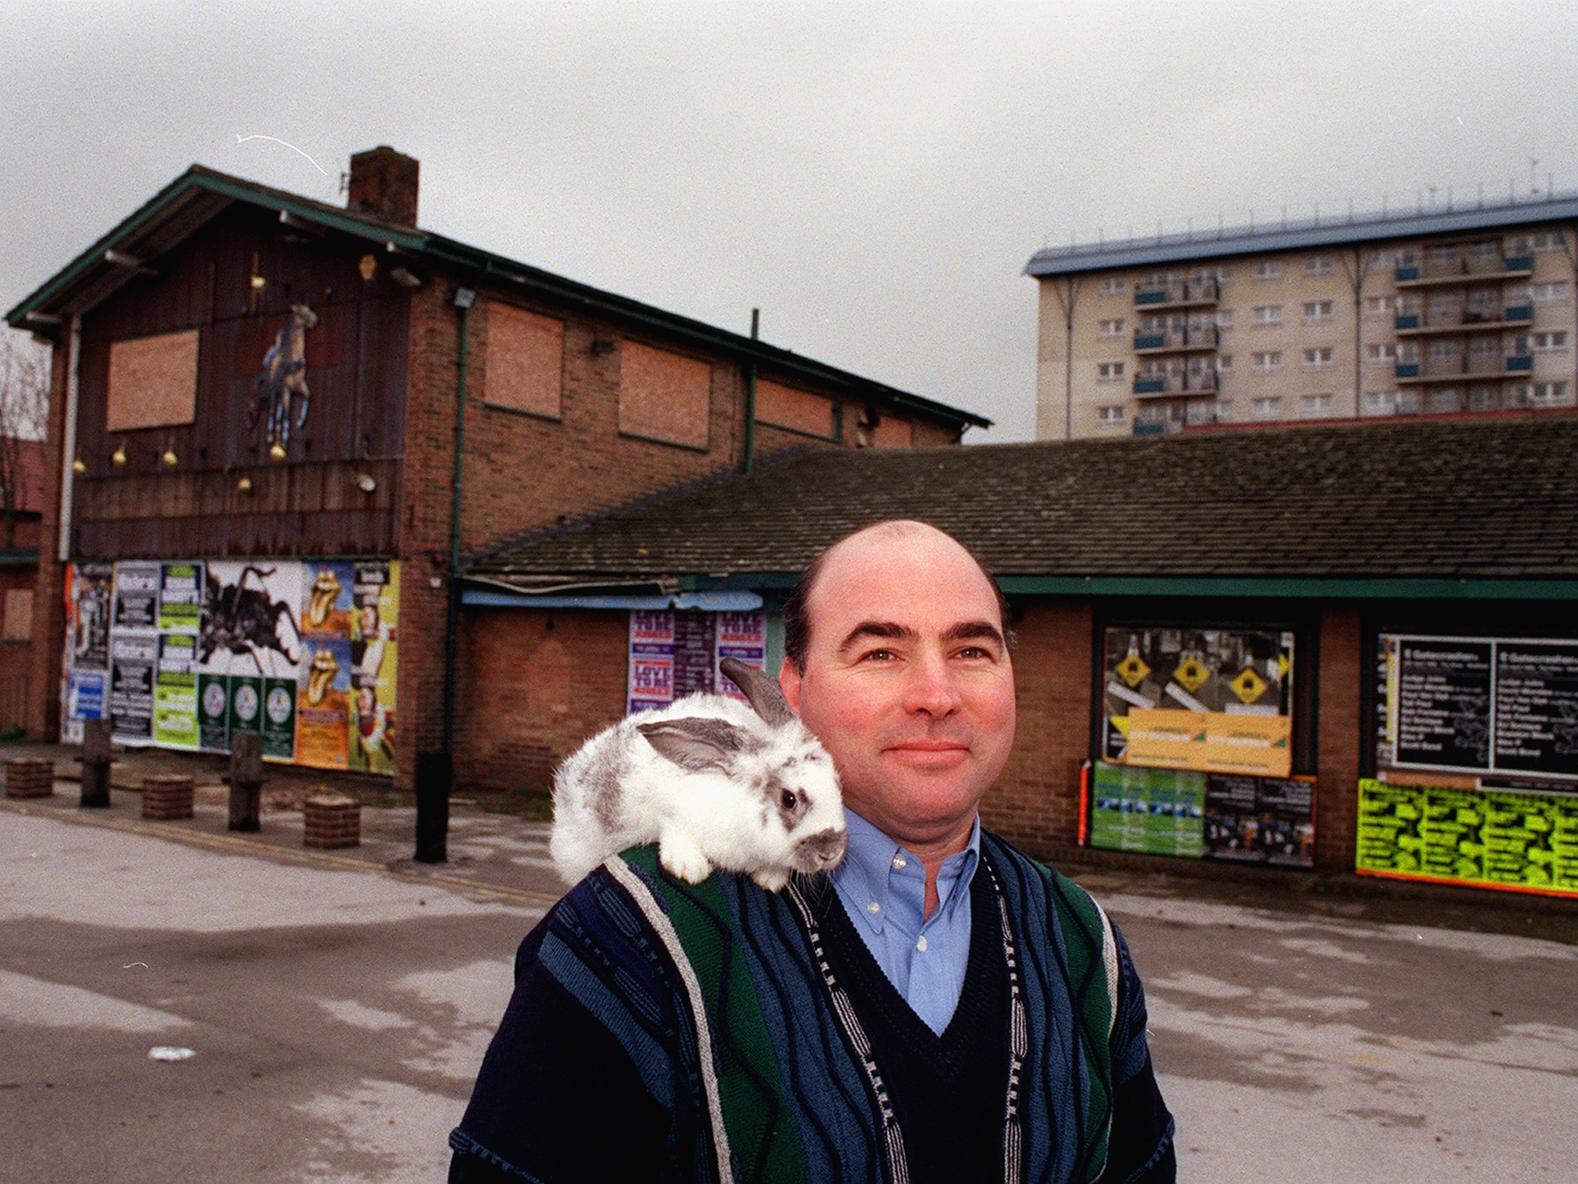 Dale Briggs, of Paws for Thought, pictured outside the former Trotters pub on York Road, Leeds, with a rabbit from his pet shop.